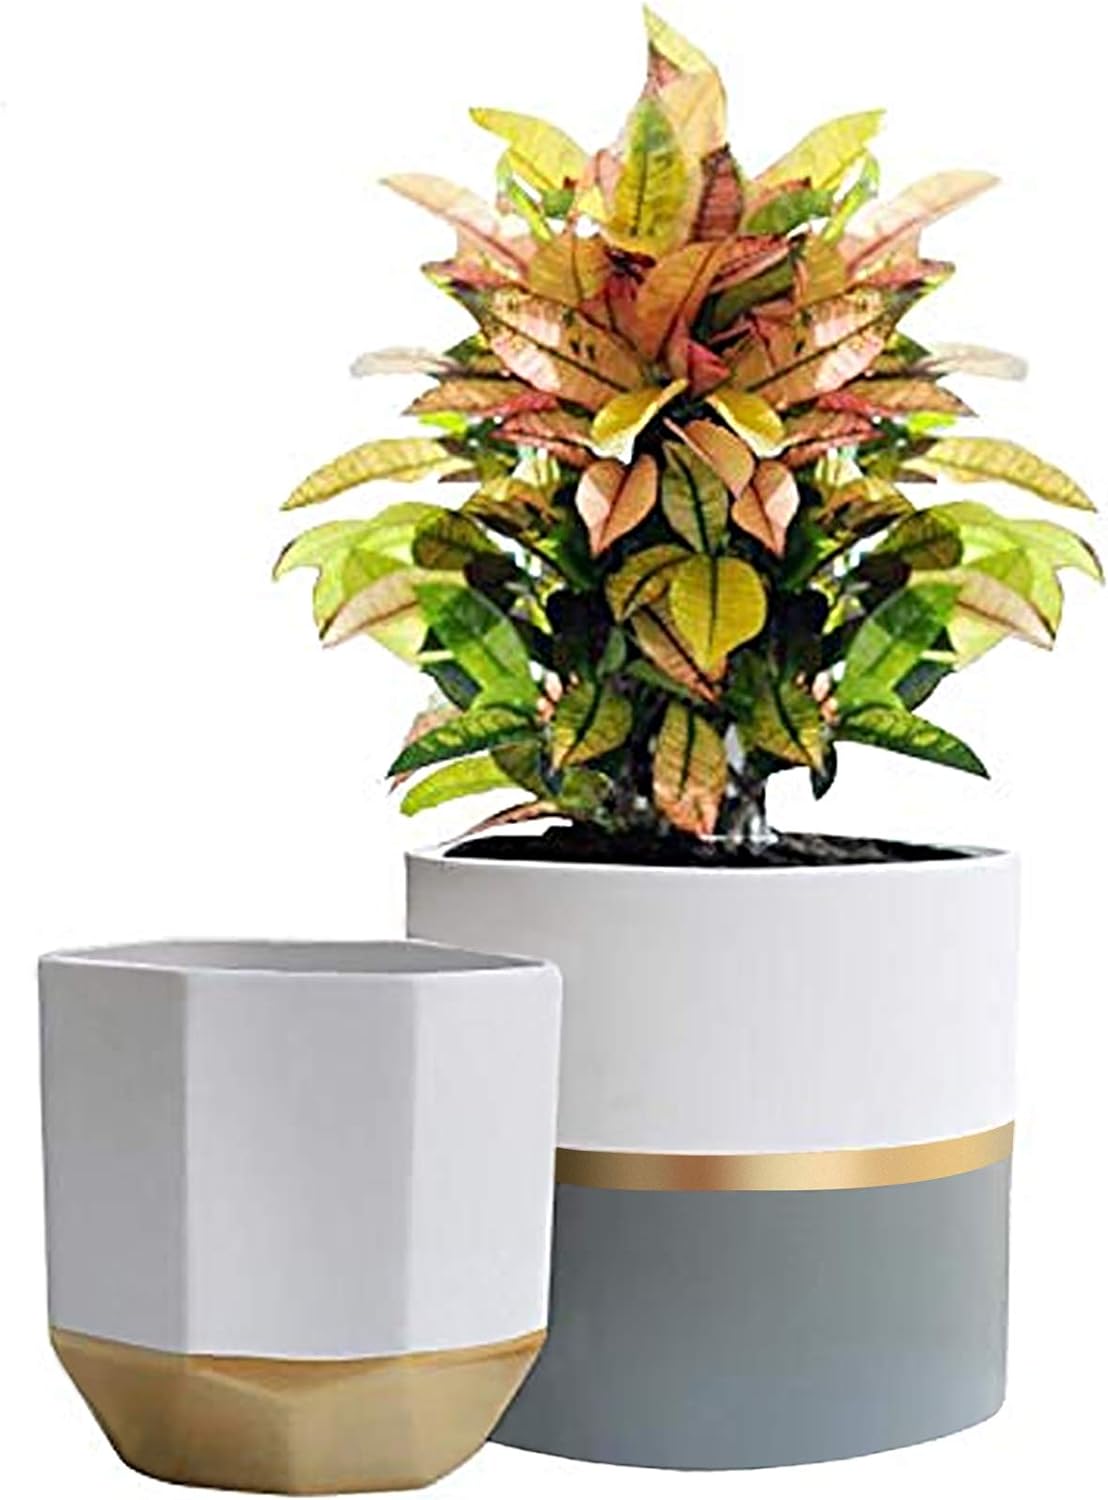 LA JOLIE MUSE White Ceramic Flower Pot Garden Planters 6.7 Inch Pack 2 Indoor Plant Containers with Gold and Grey Detailing